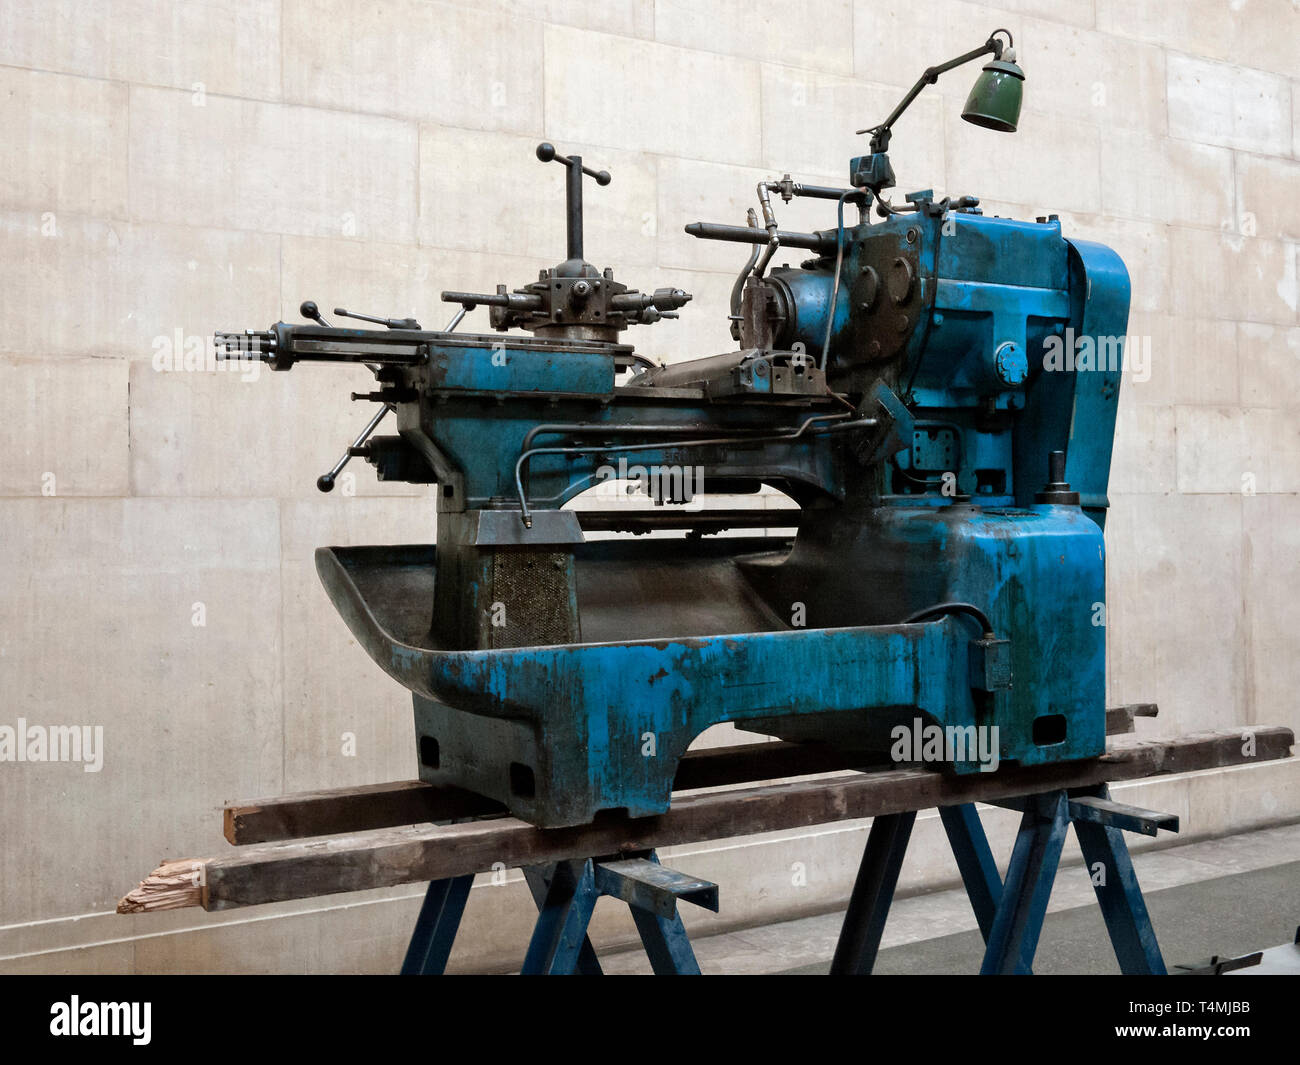 I Vintage lathe and industrial tools on display in a London Art Gallery Stock Photo